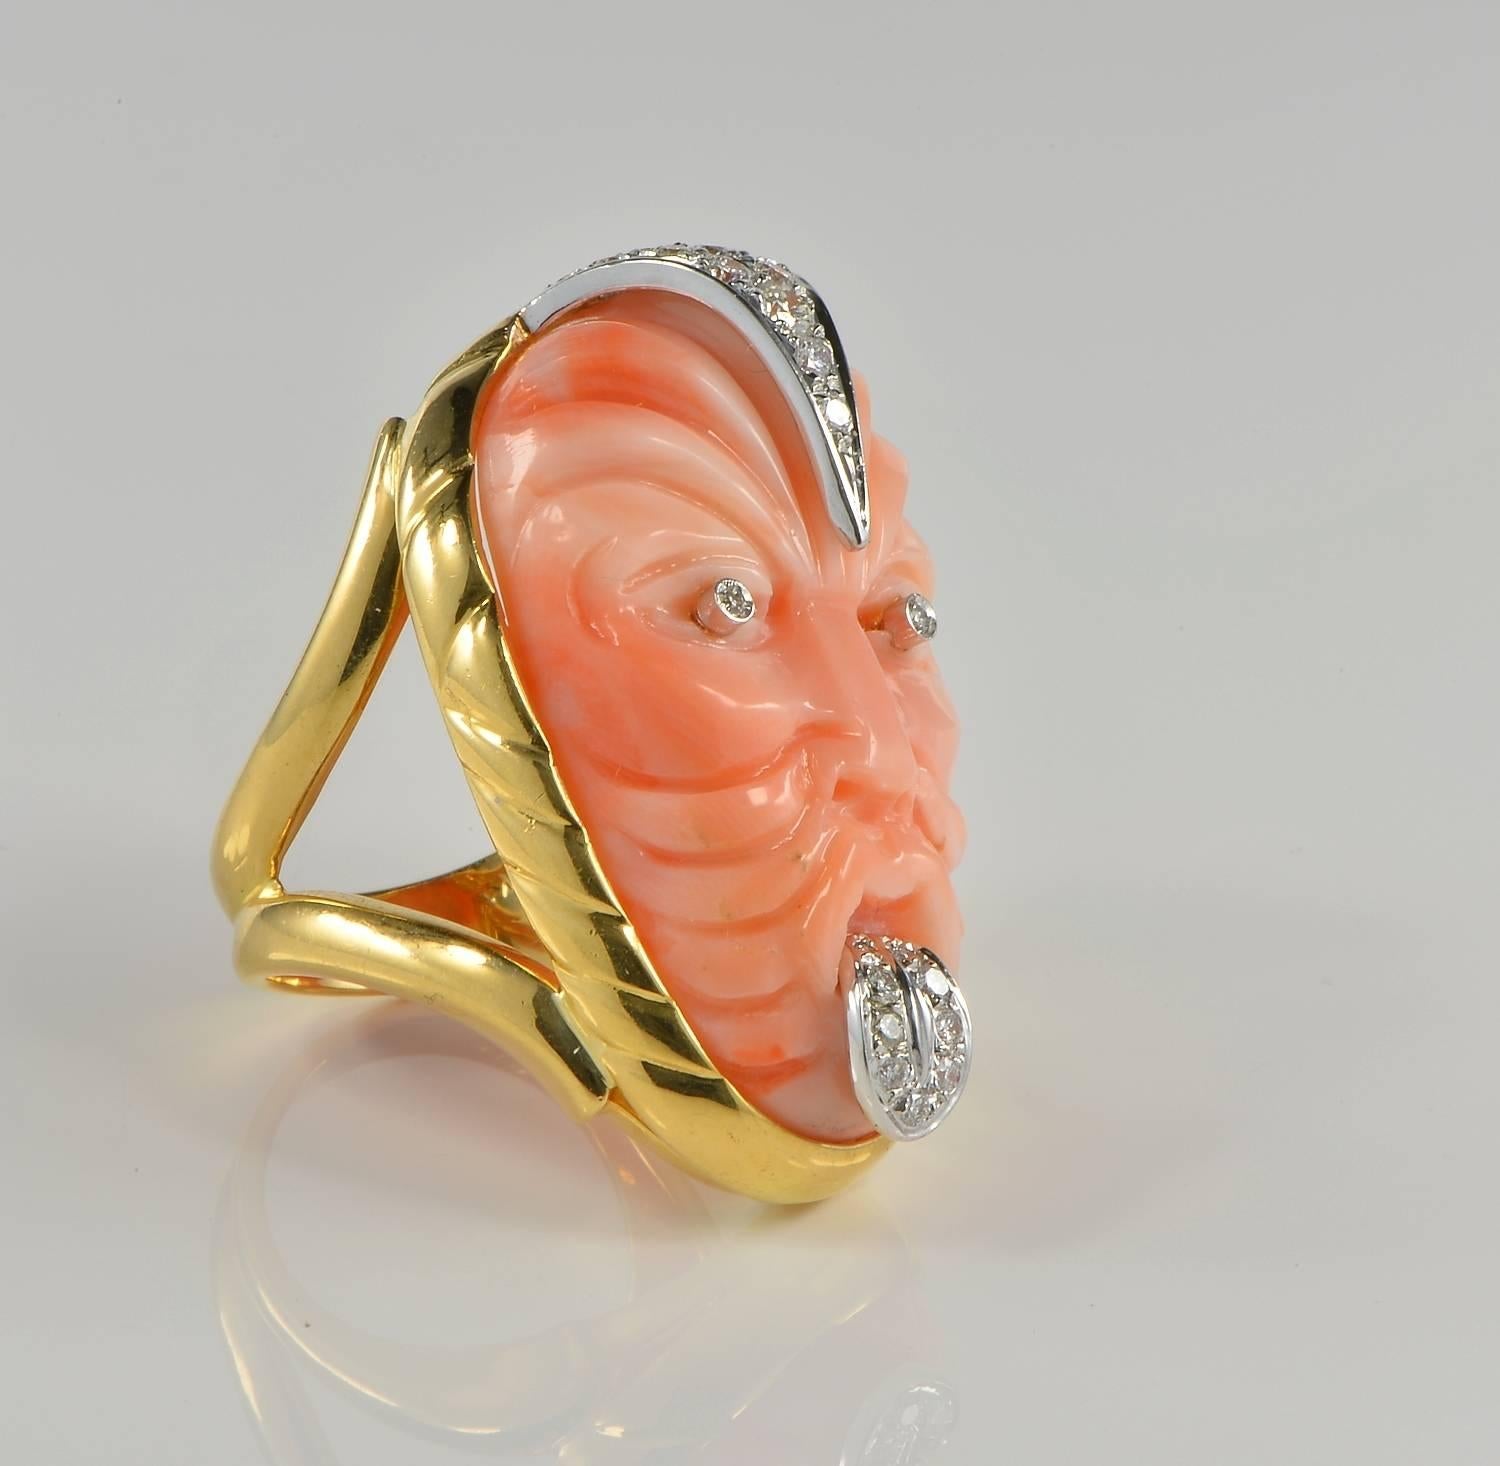 A Rare and unique vintage ring dating 1970 ca, featuring a jumbo size Natural Coral mask featuring a Maori face with a Pukana expression.
Pūkana

Pūkana or facial expressions are an important facet of Māori performance. They help emphasise a point